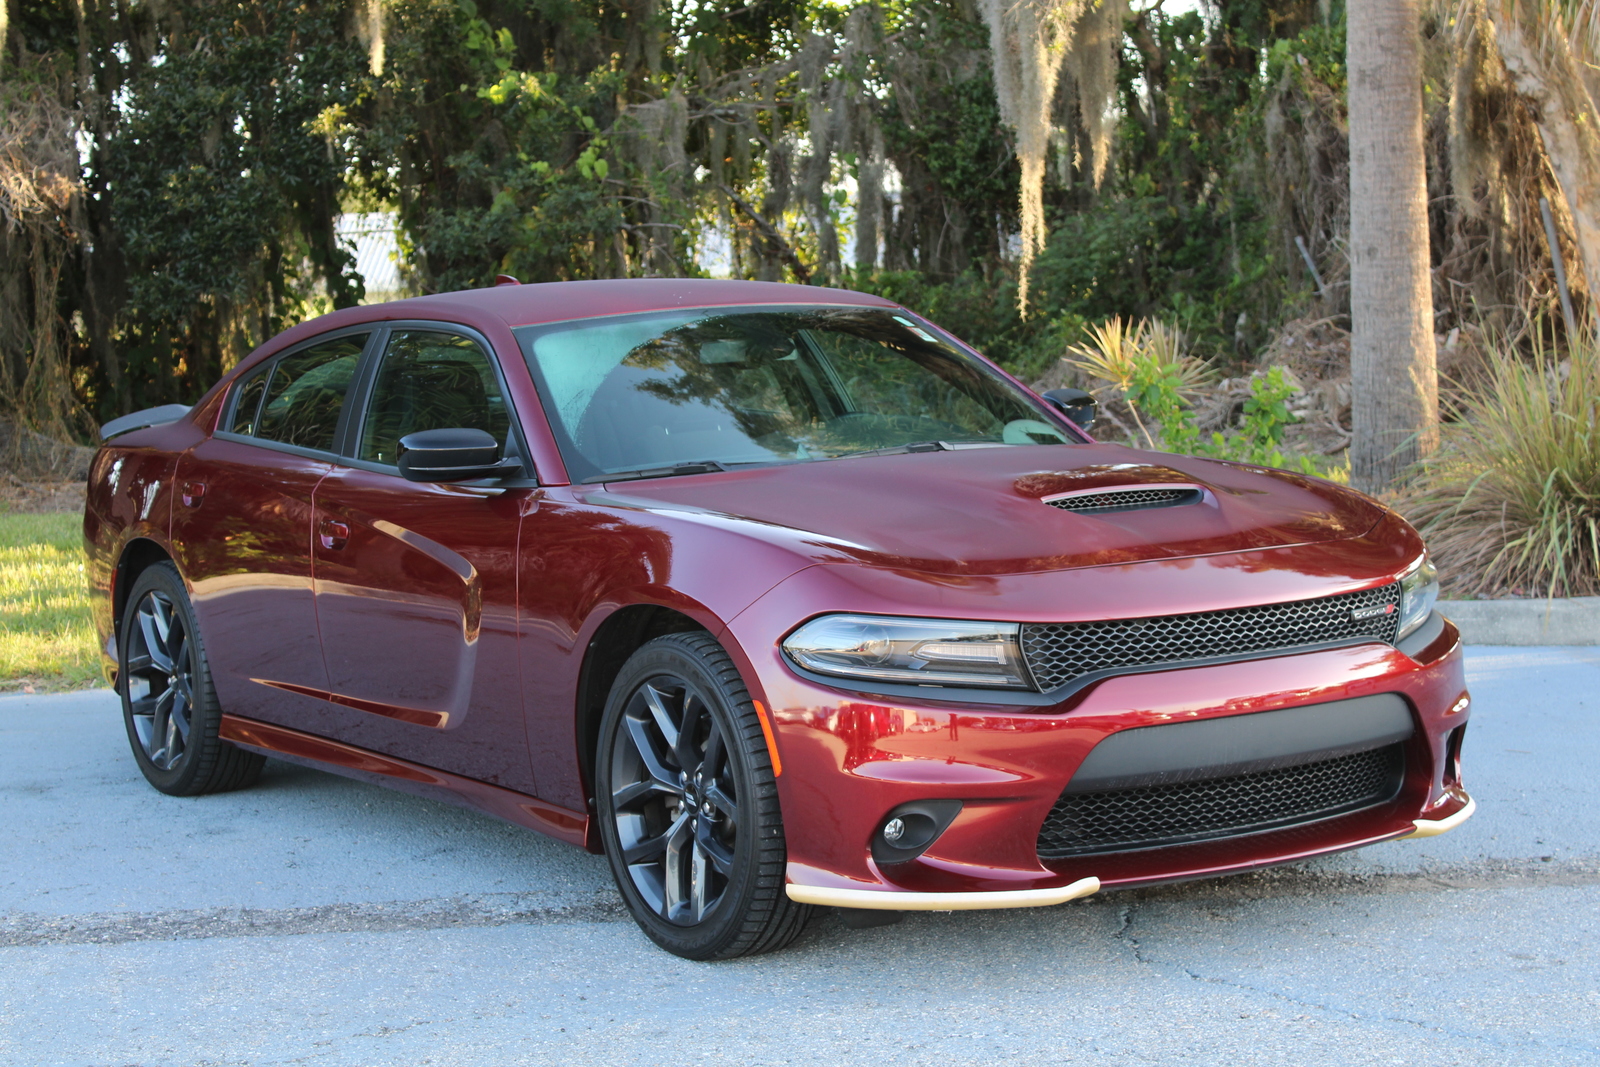 Pre-Owned 2019 Dodge Charger GT 4dr Car in Sarasota #JP8769 | Wilde ...